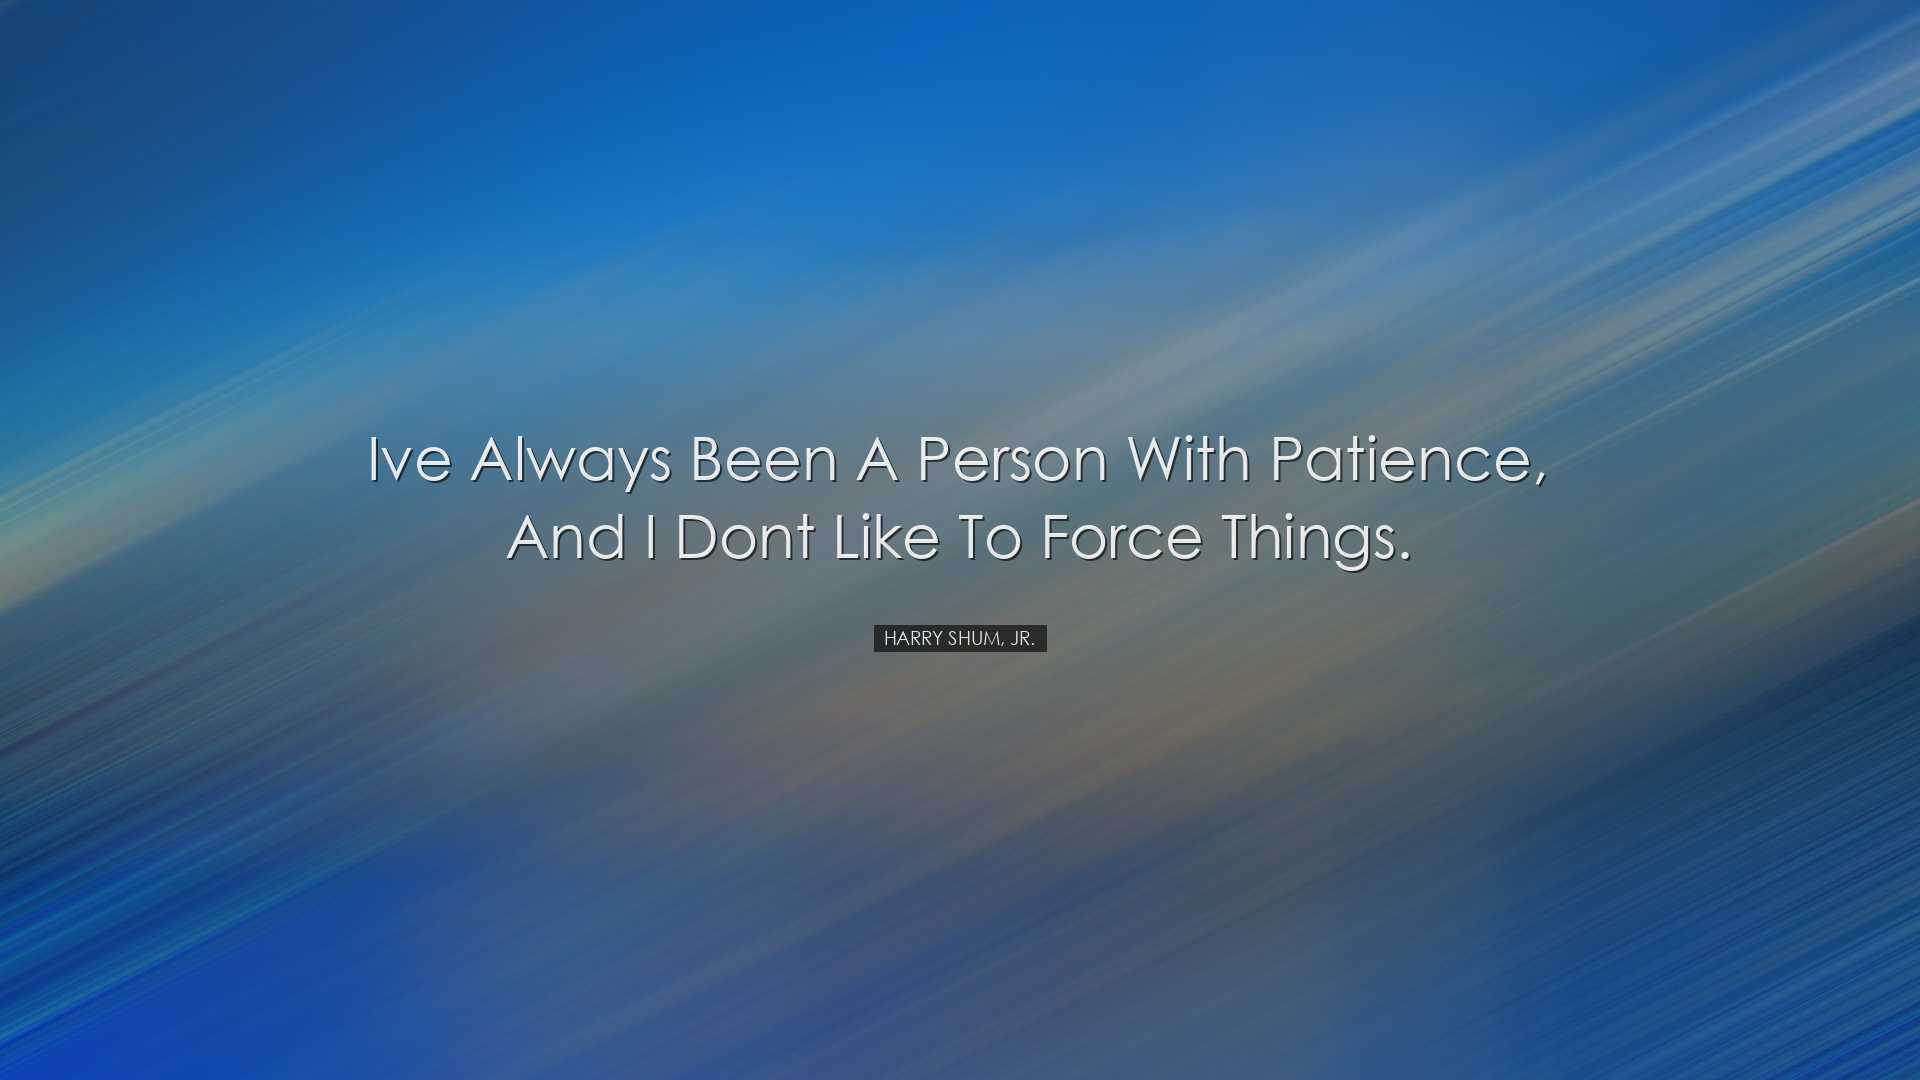 Ive always been a person with patience, and I dont like to force t